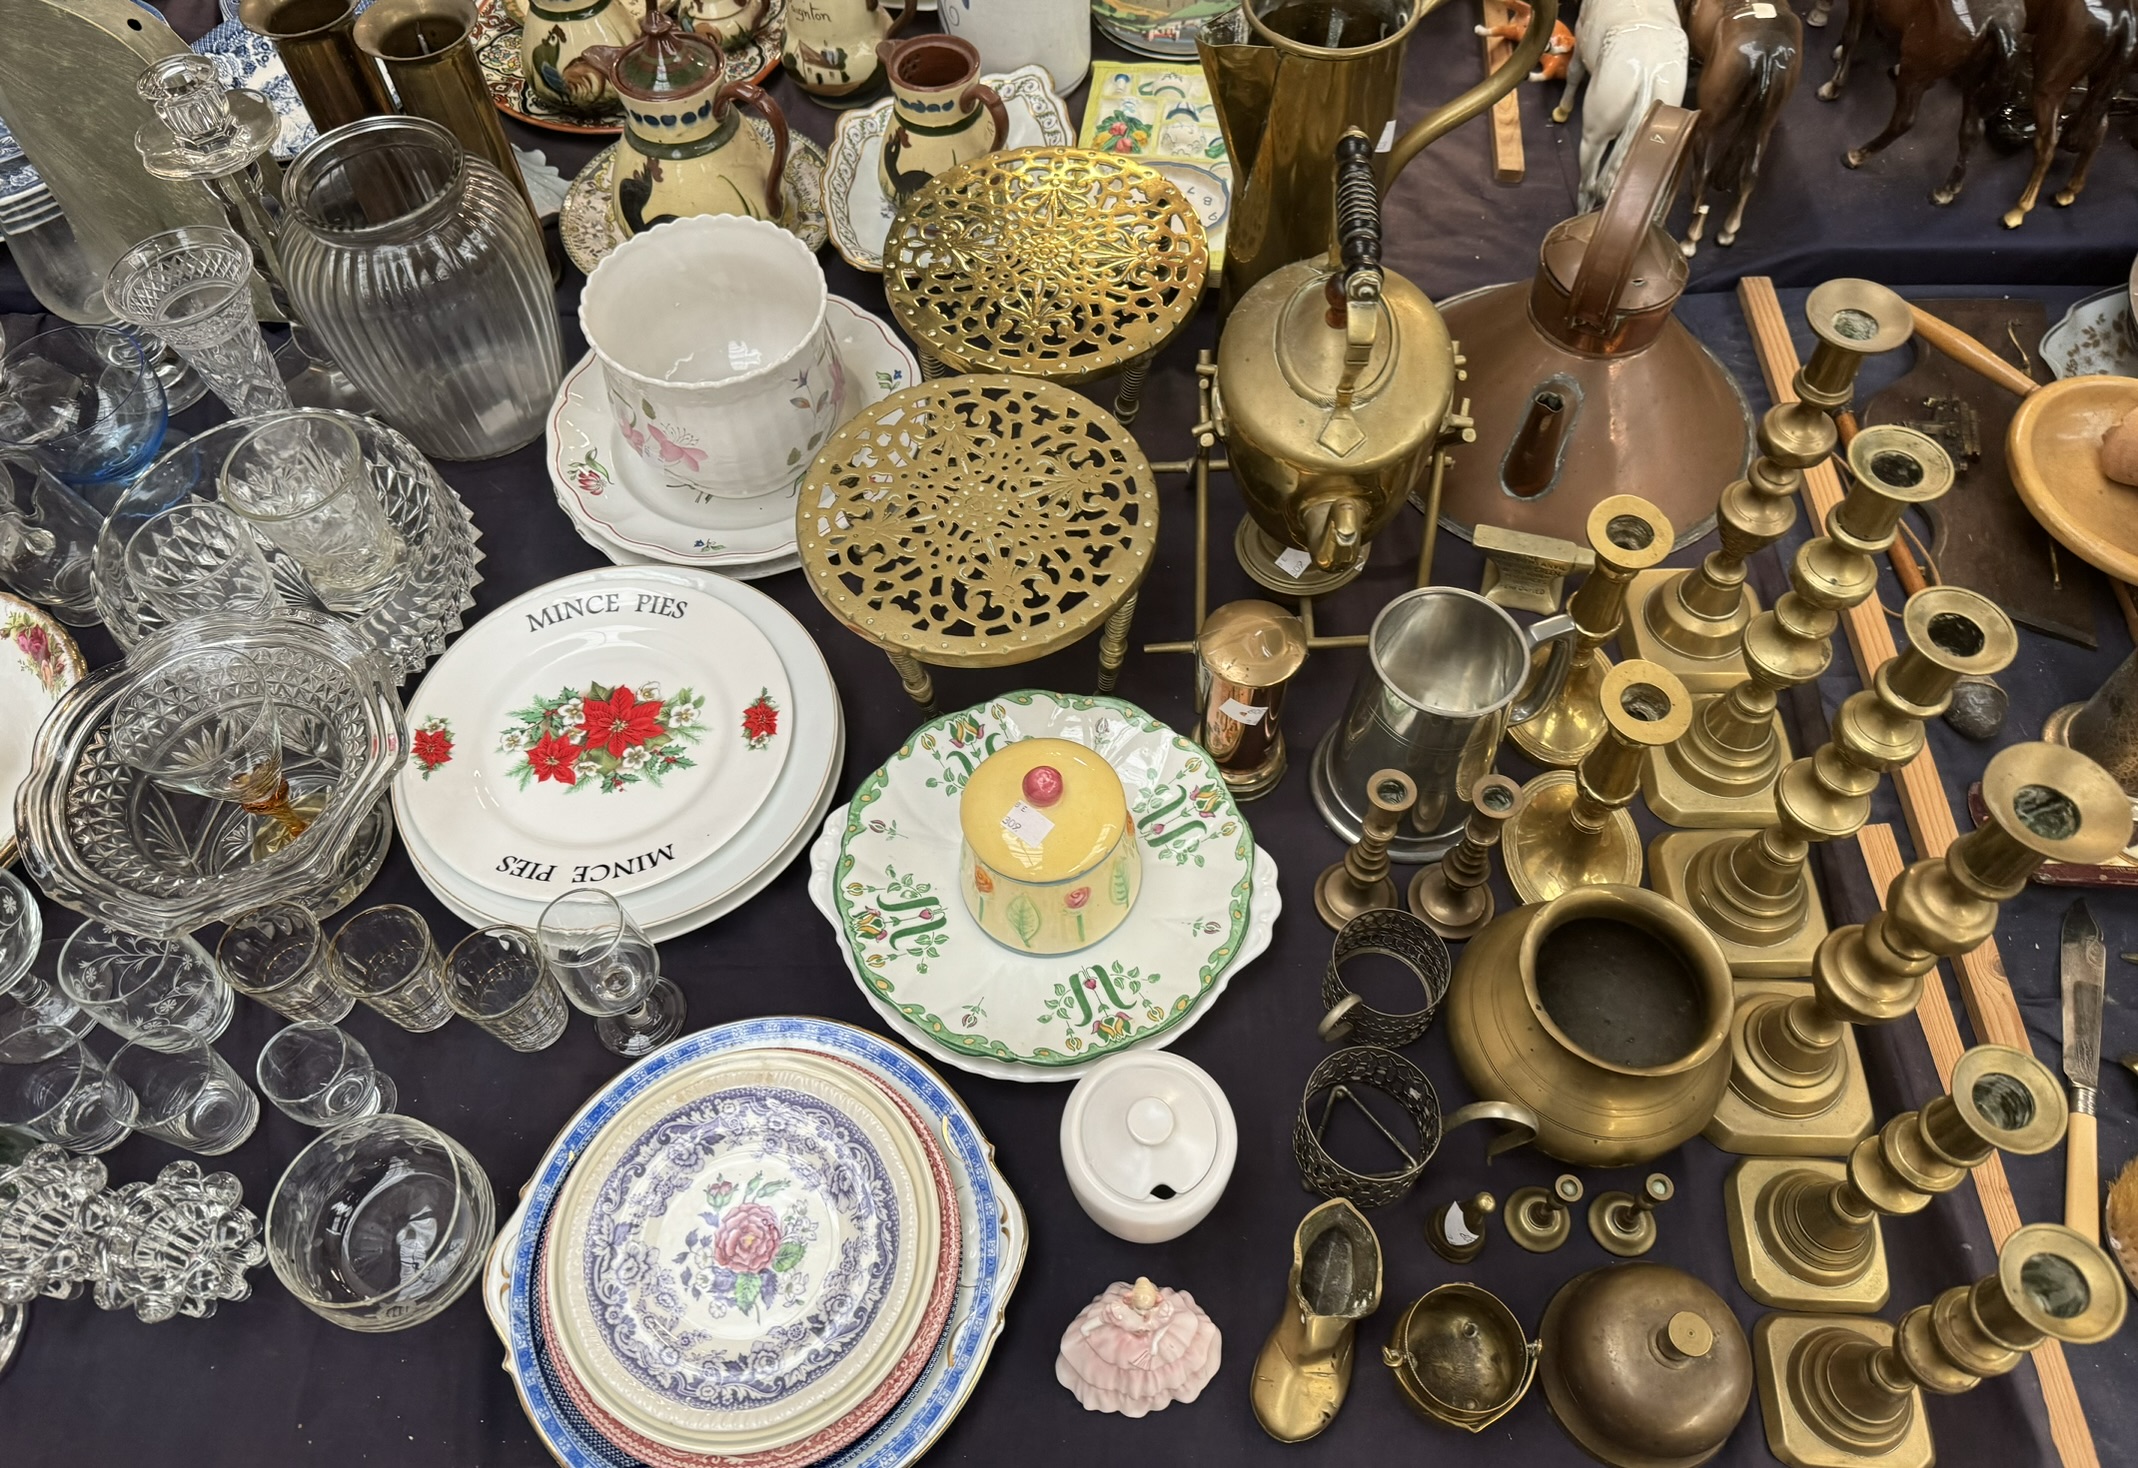 An extensive lot including drinking glasses, glass bowls, glass jugs, pottery plates, - Image 2 of 4